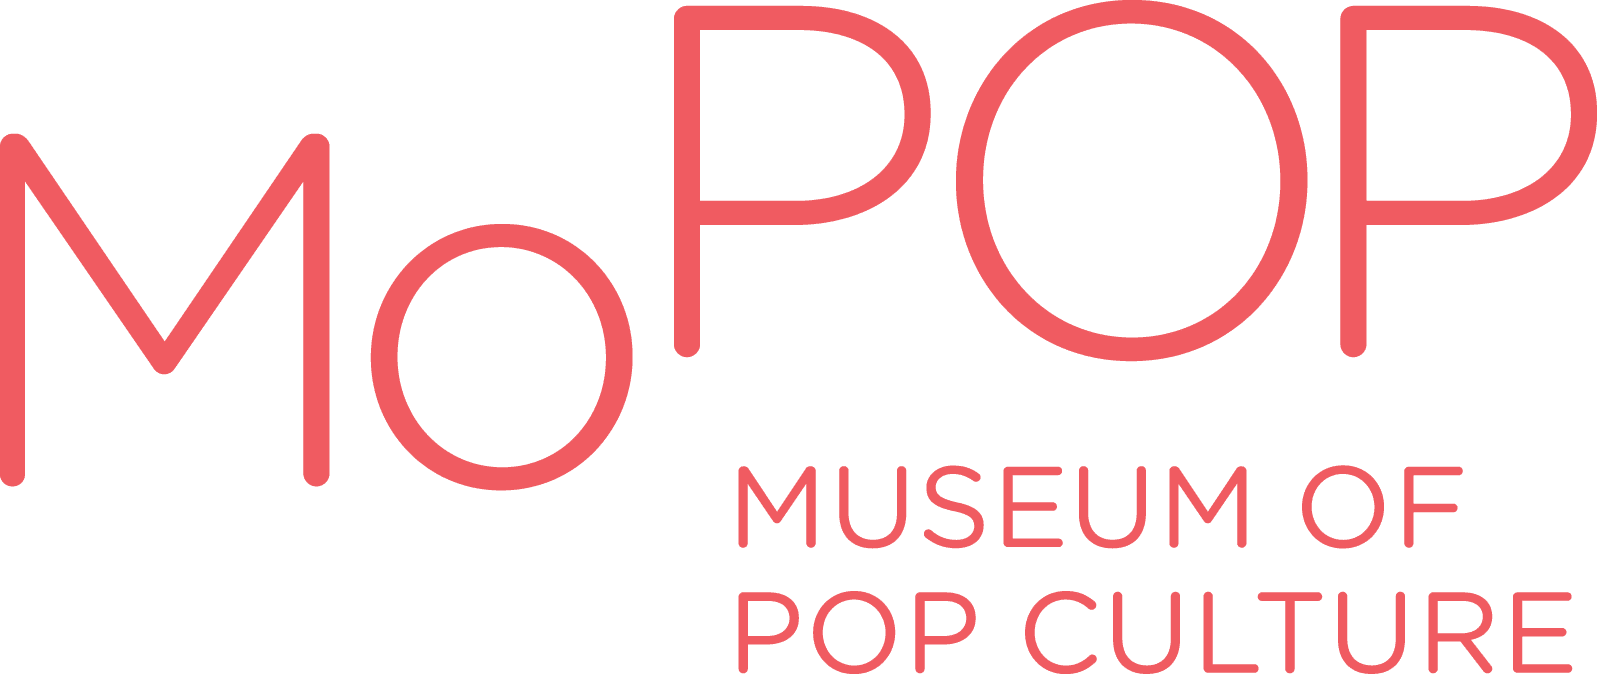 Museum of Pop Culture by Interactive Entertainment Group, Inc.